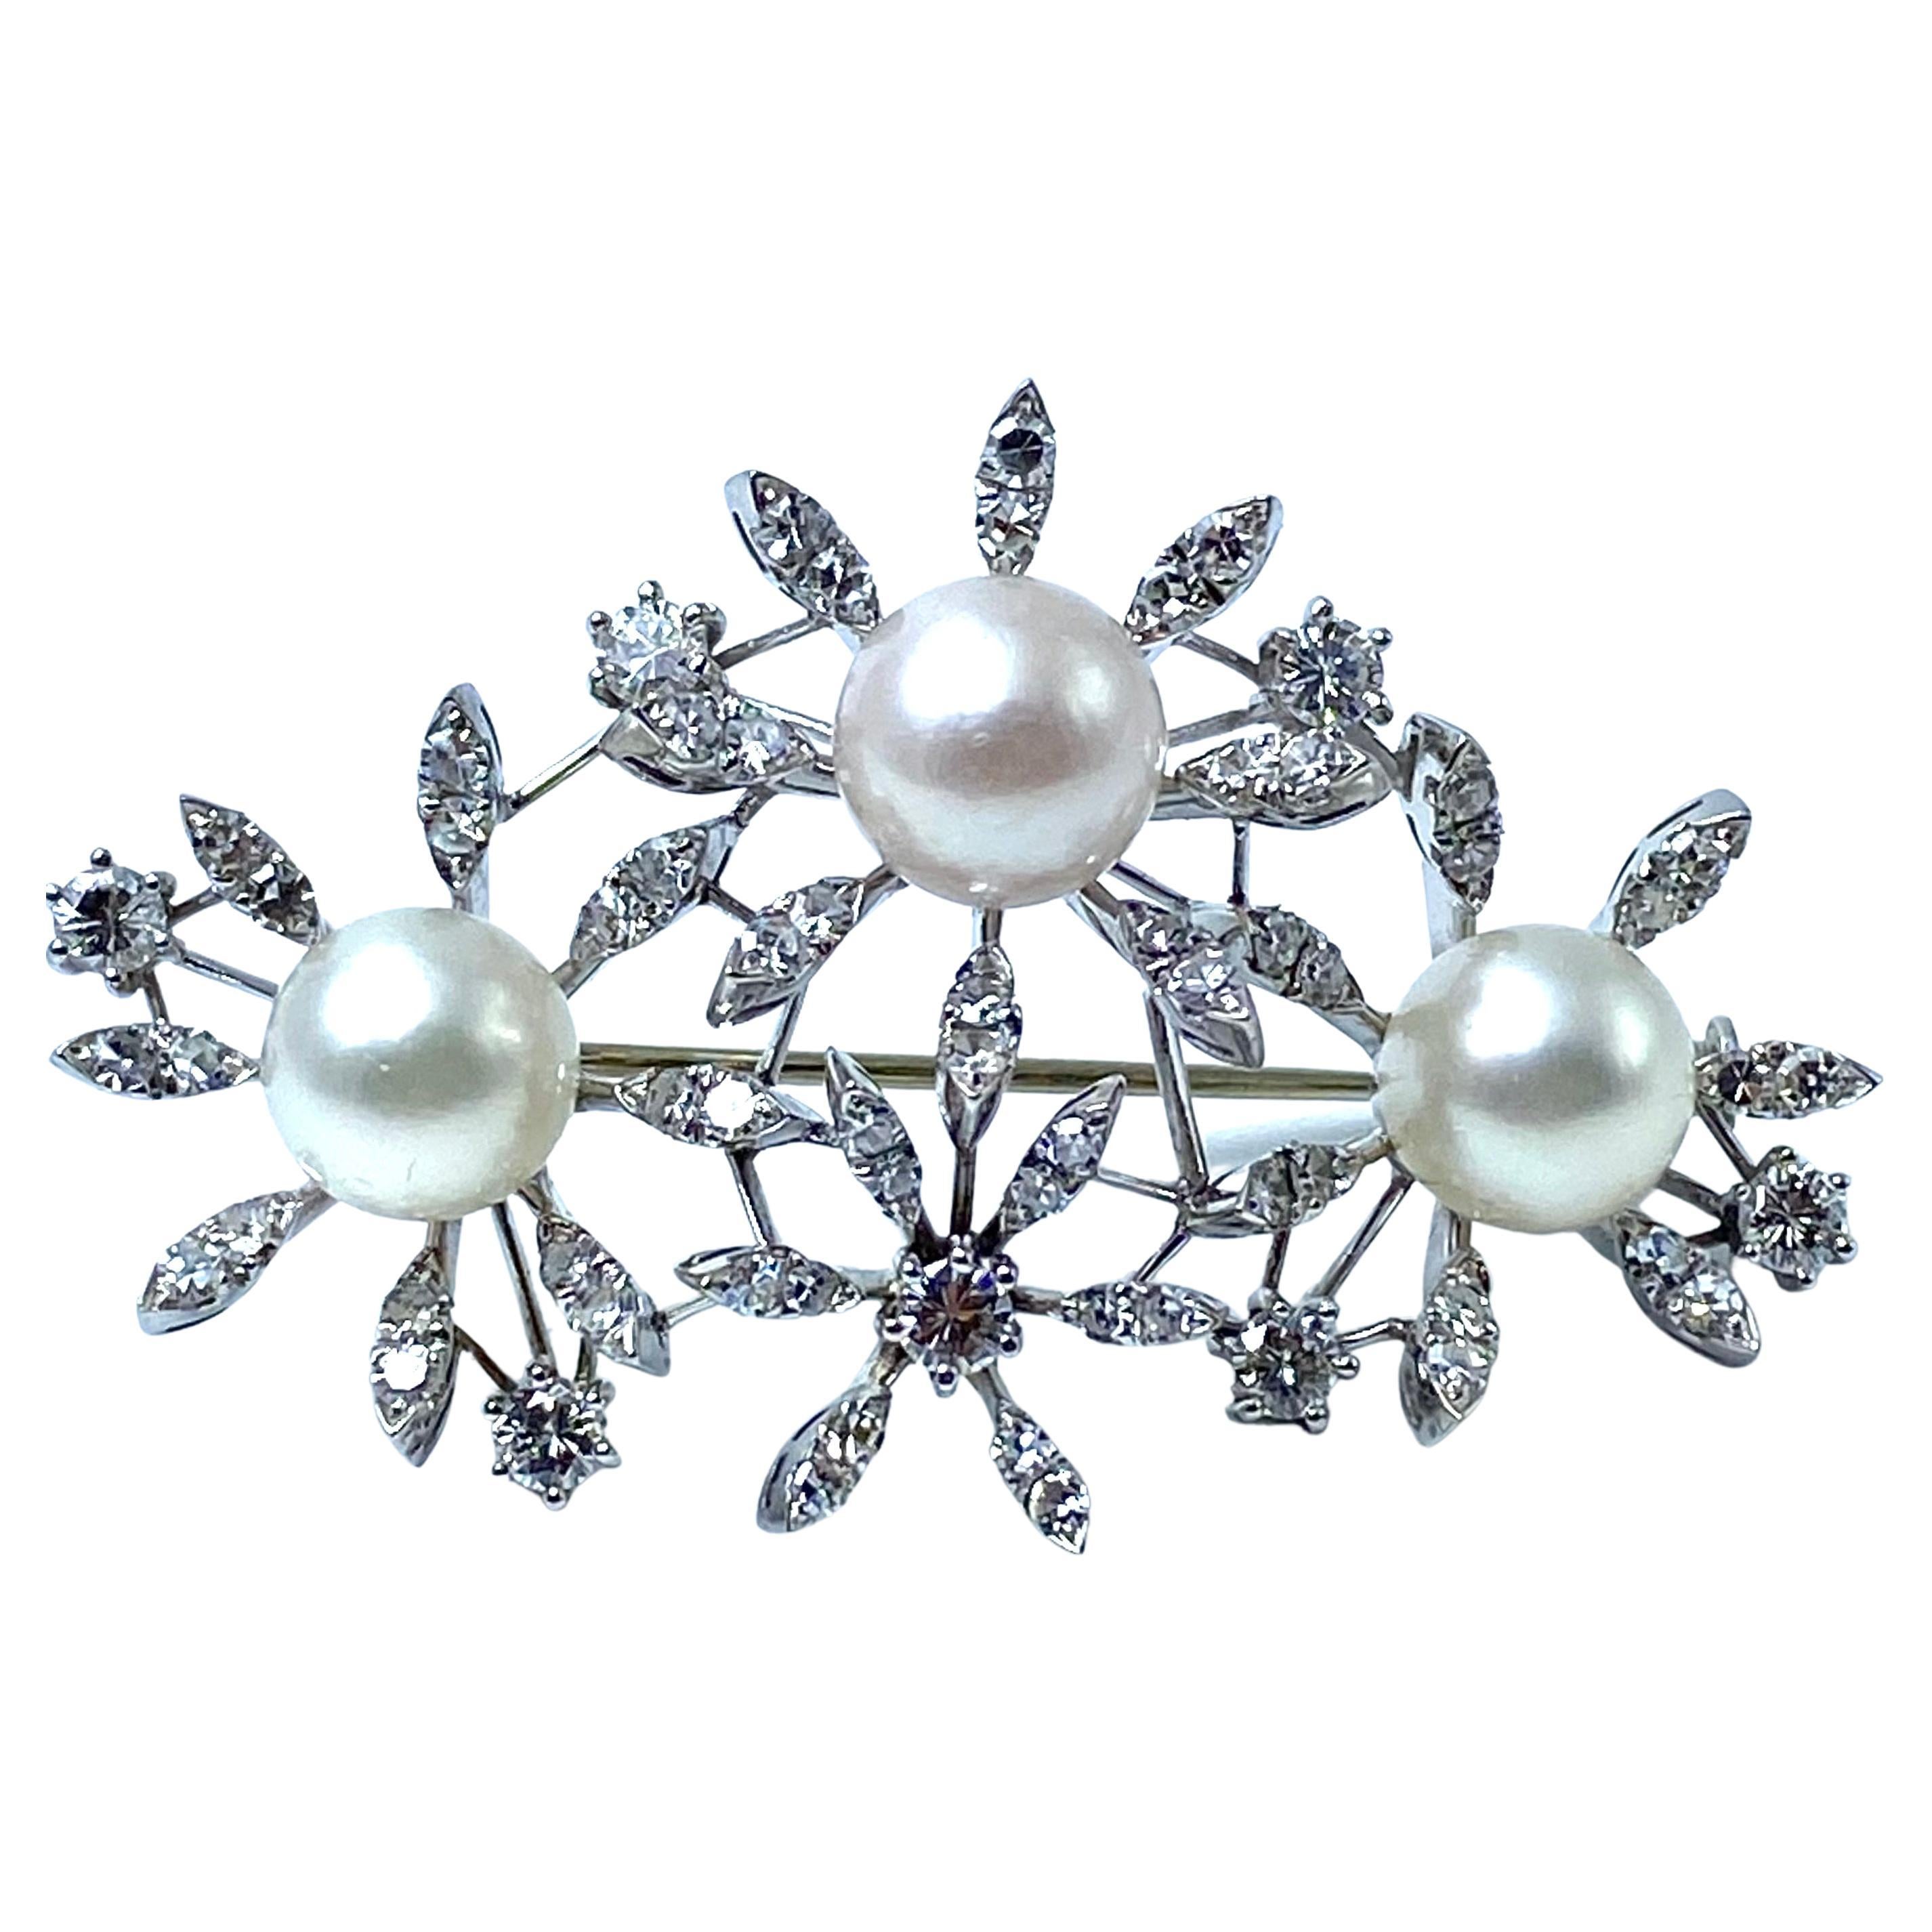 Stunning "daisies" brooch with diamonds and pearls